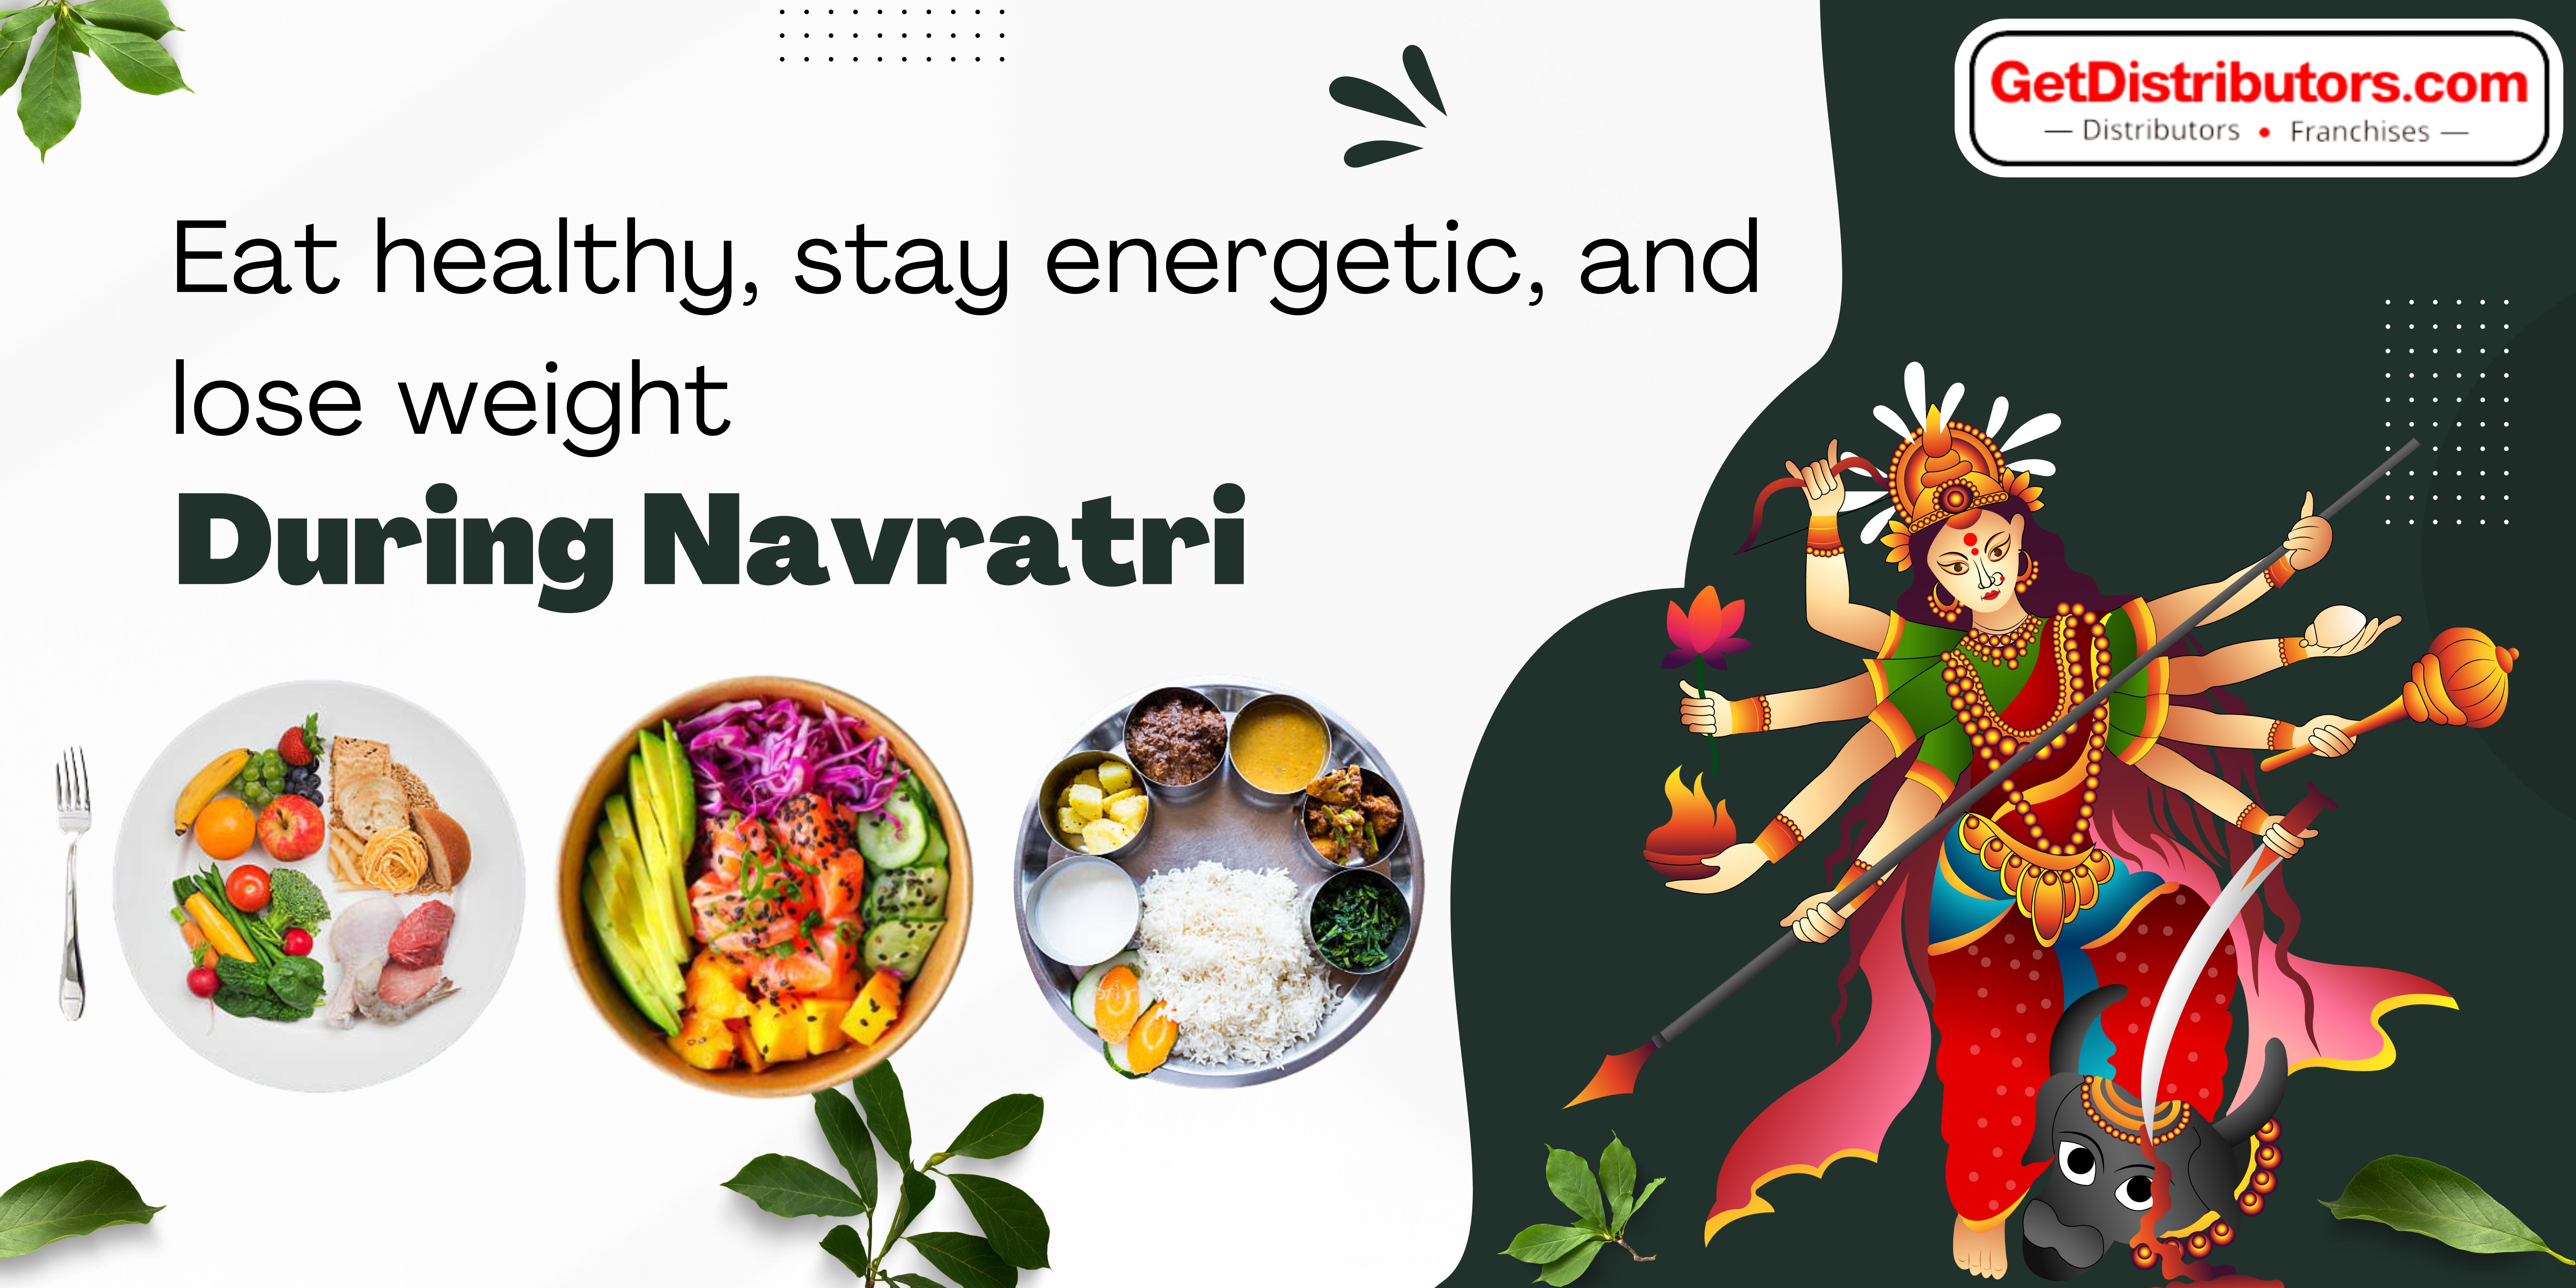 Eat healthy, stay energetic, and lose weight during Navratri